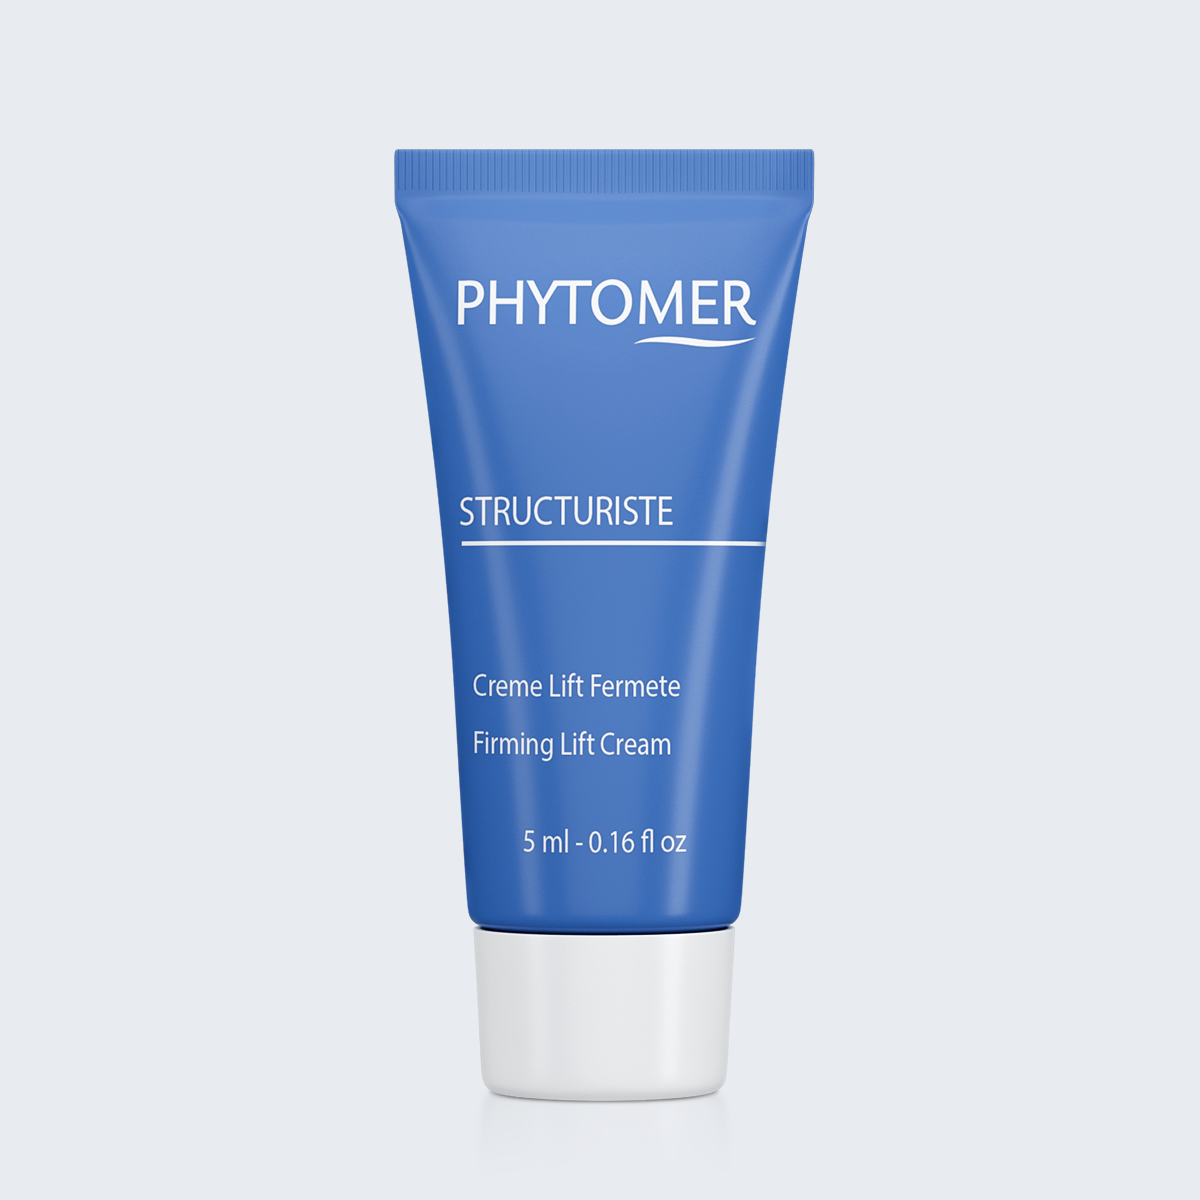 SAMPLE: PHYTOMER STRUCTURISTE FIRMING LIFTING CREAM